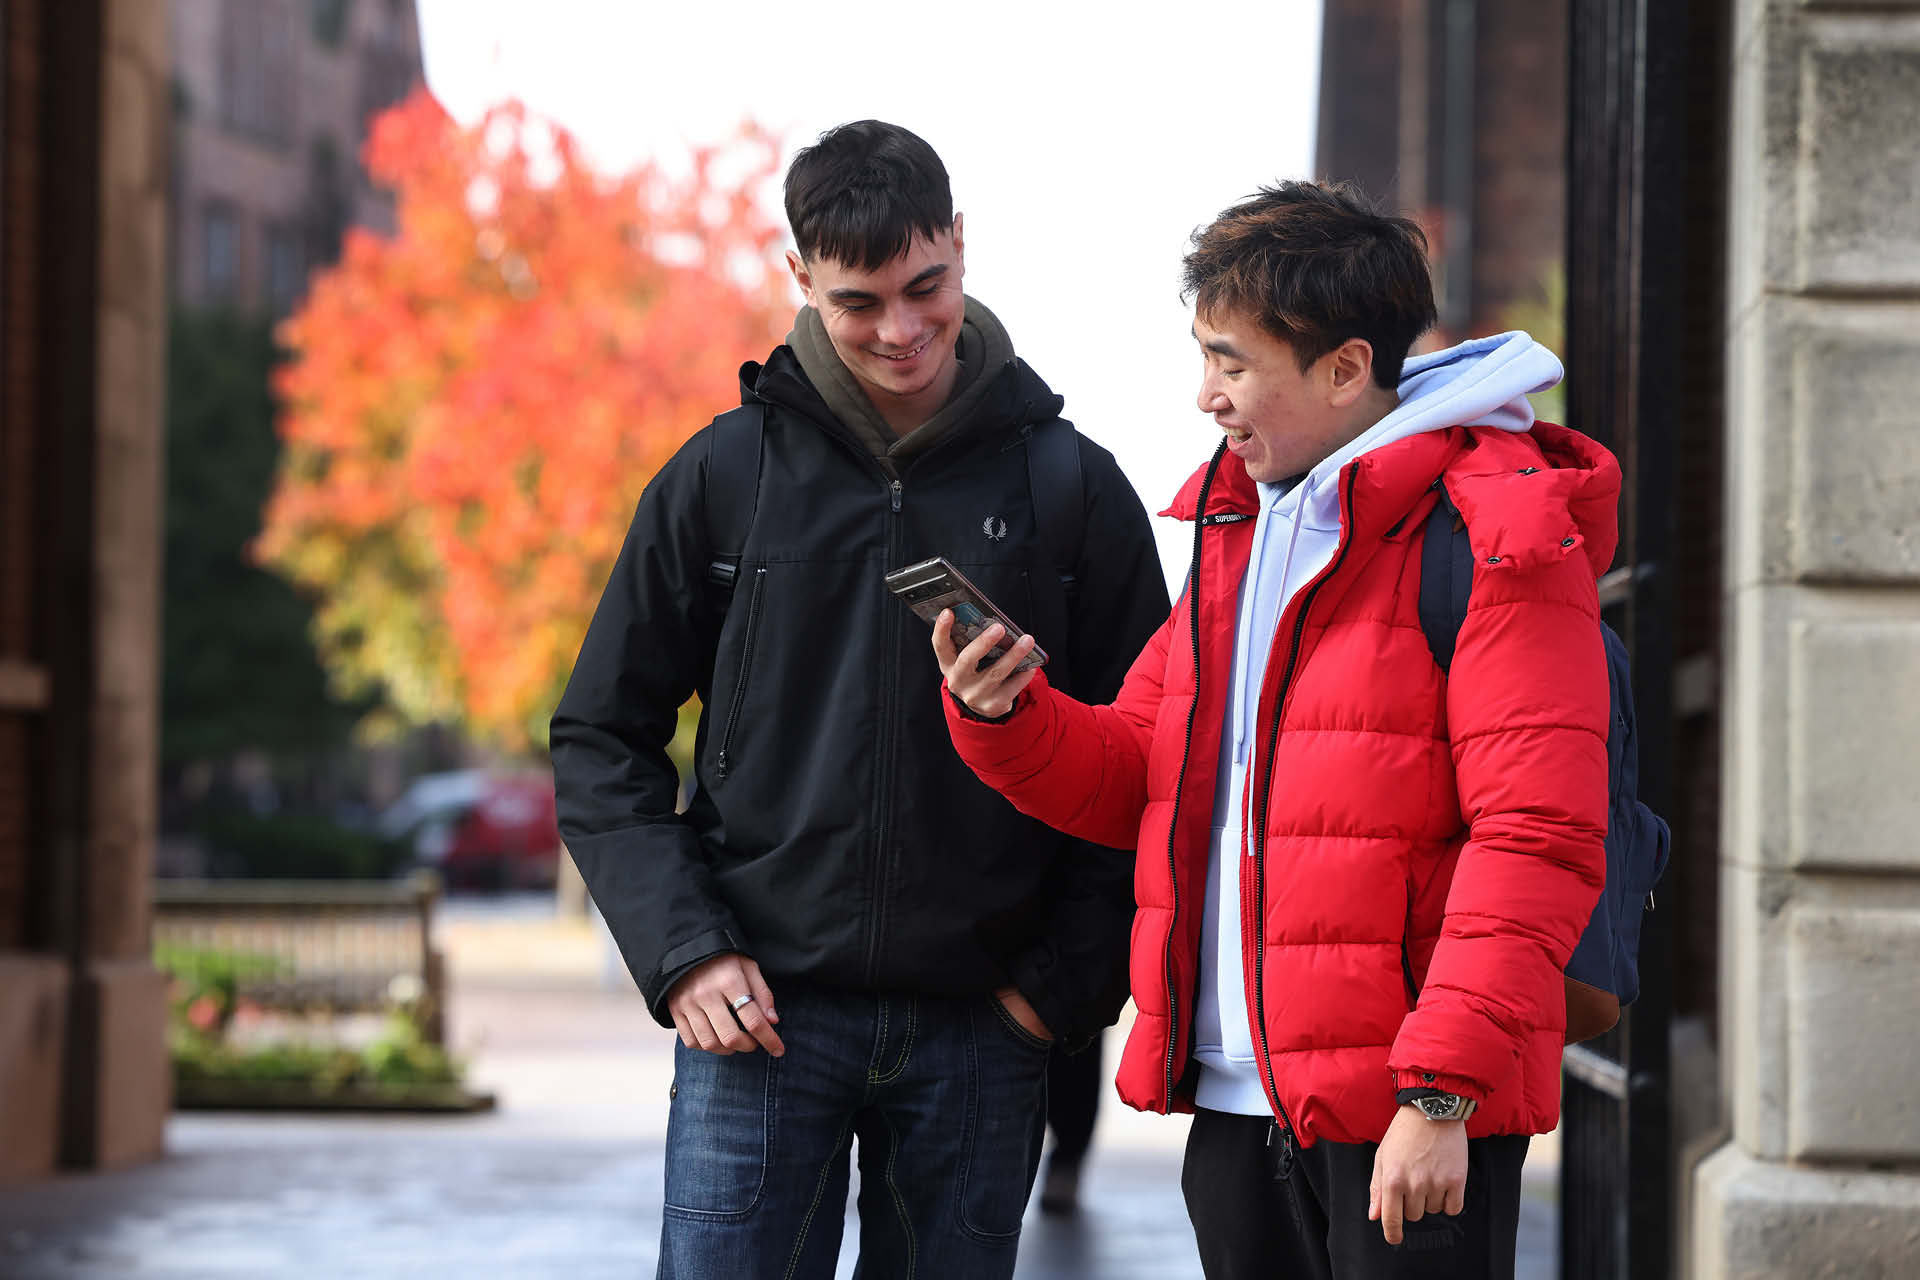 Two students looking at a phone and smiling